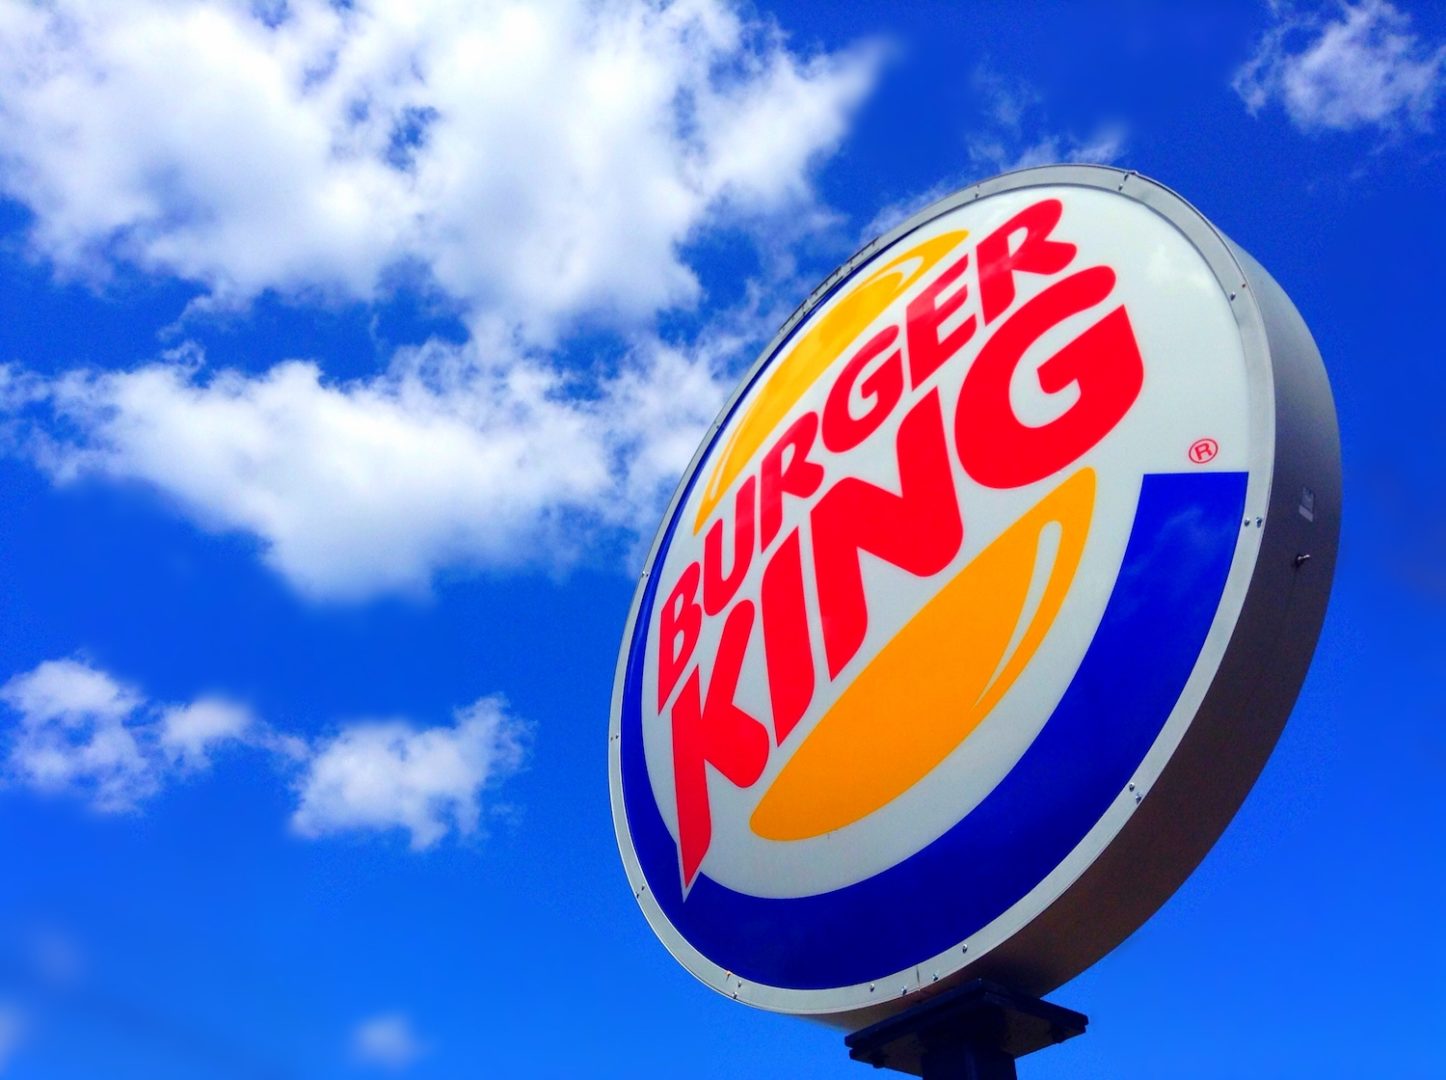 Burger King sign with clouds